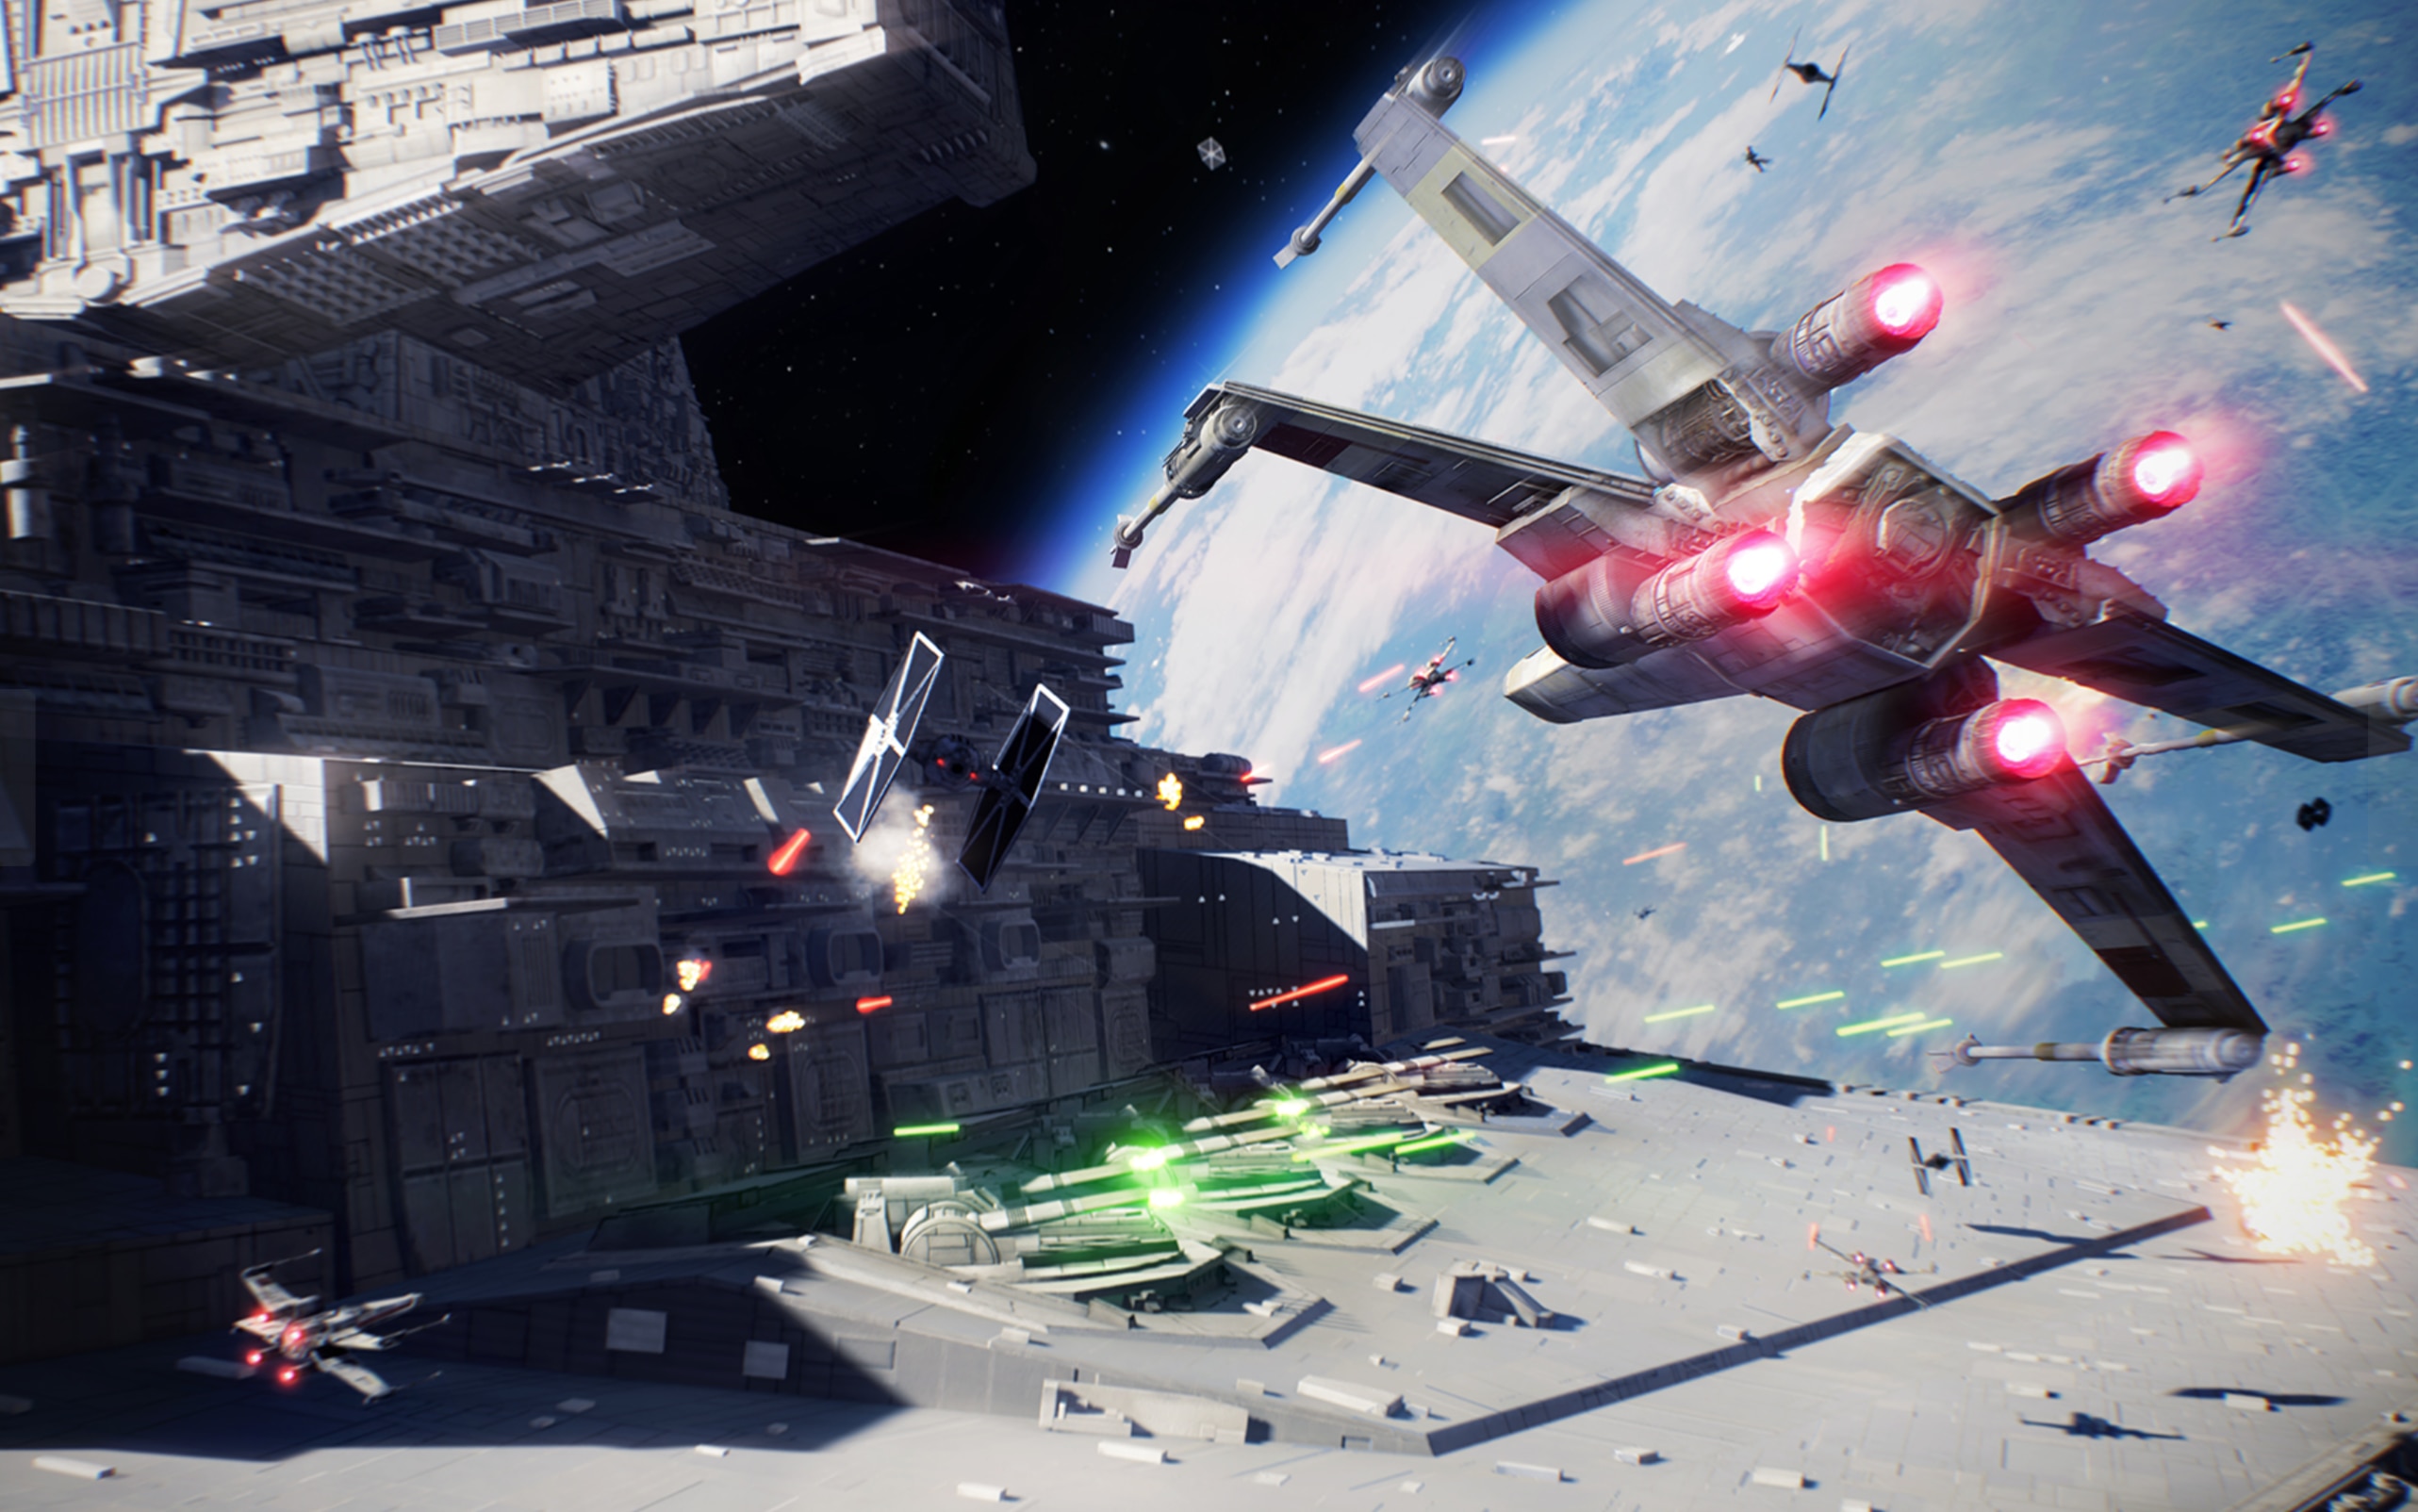 Star Wars Battlefront II X-Wing dogfight